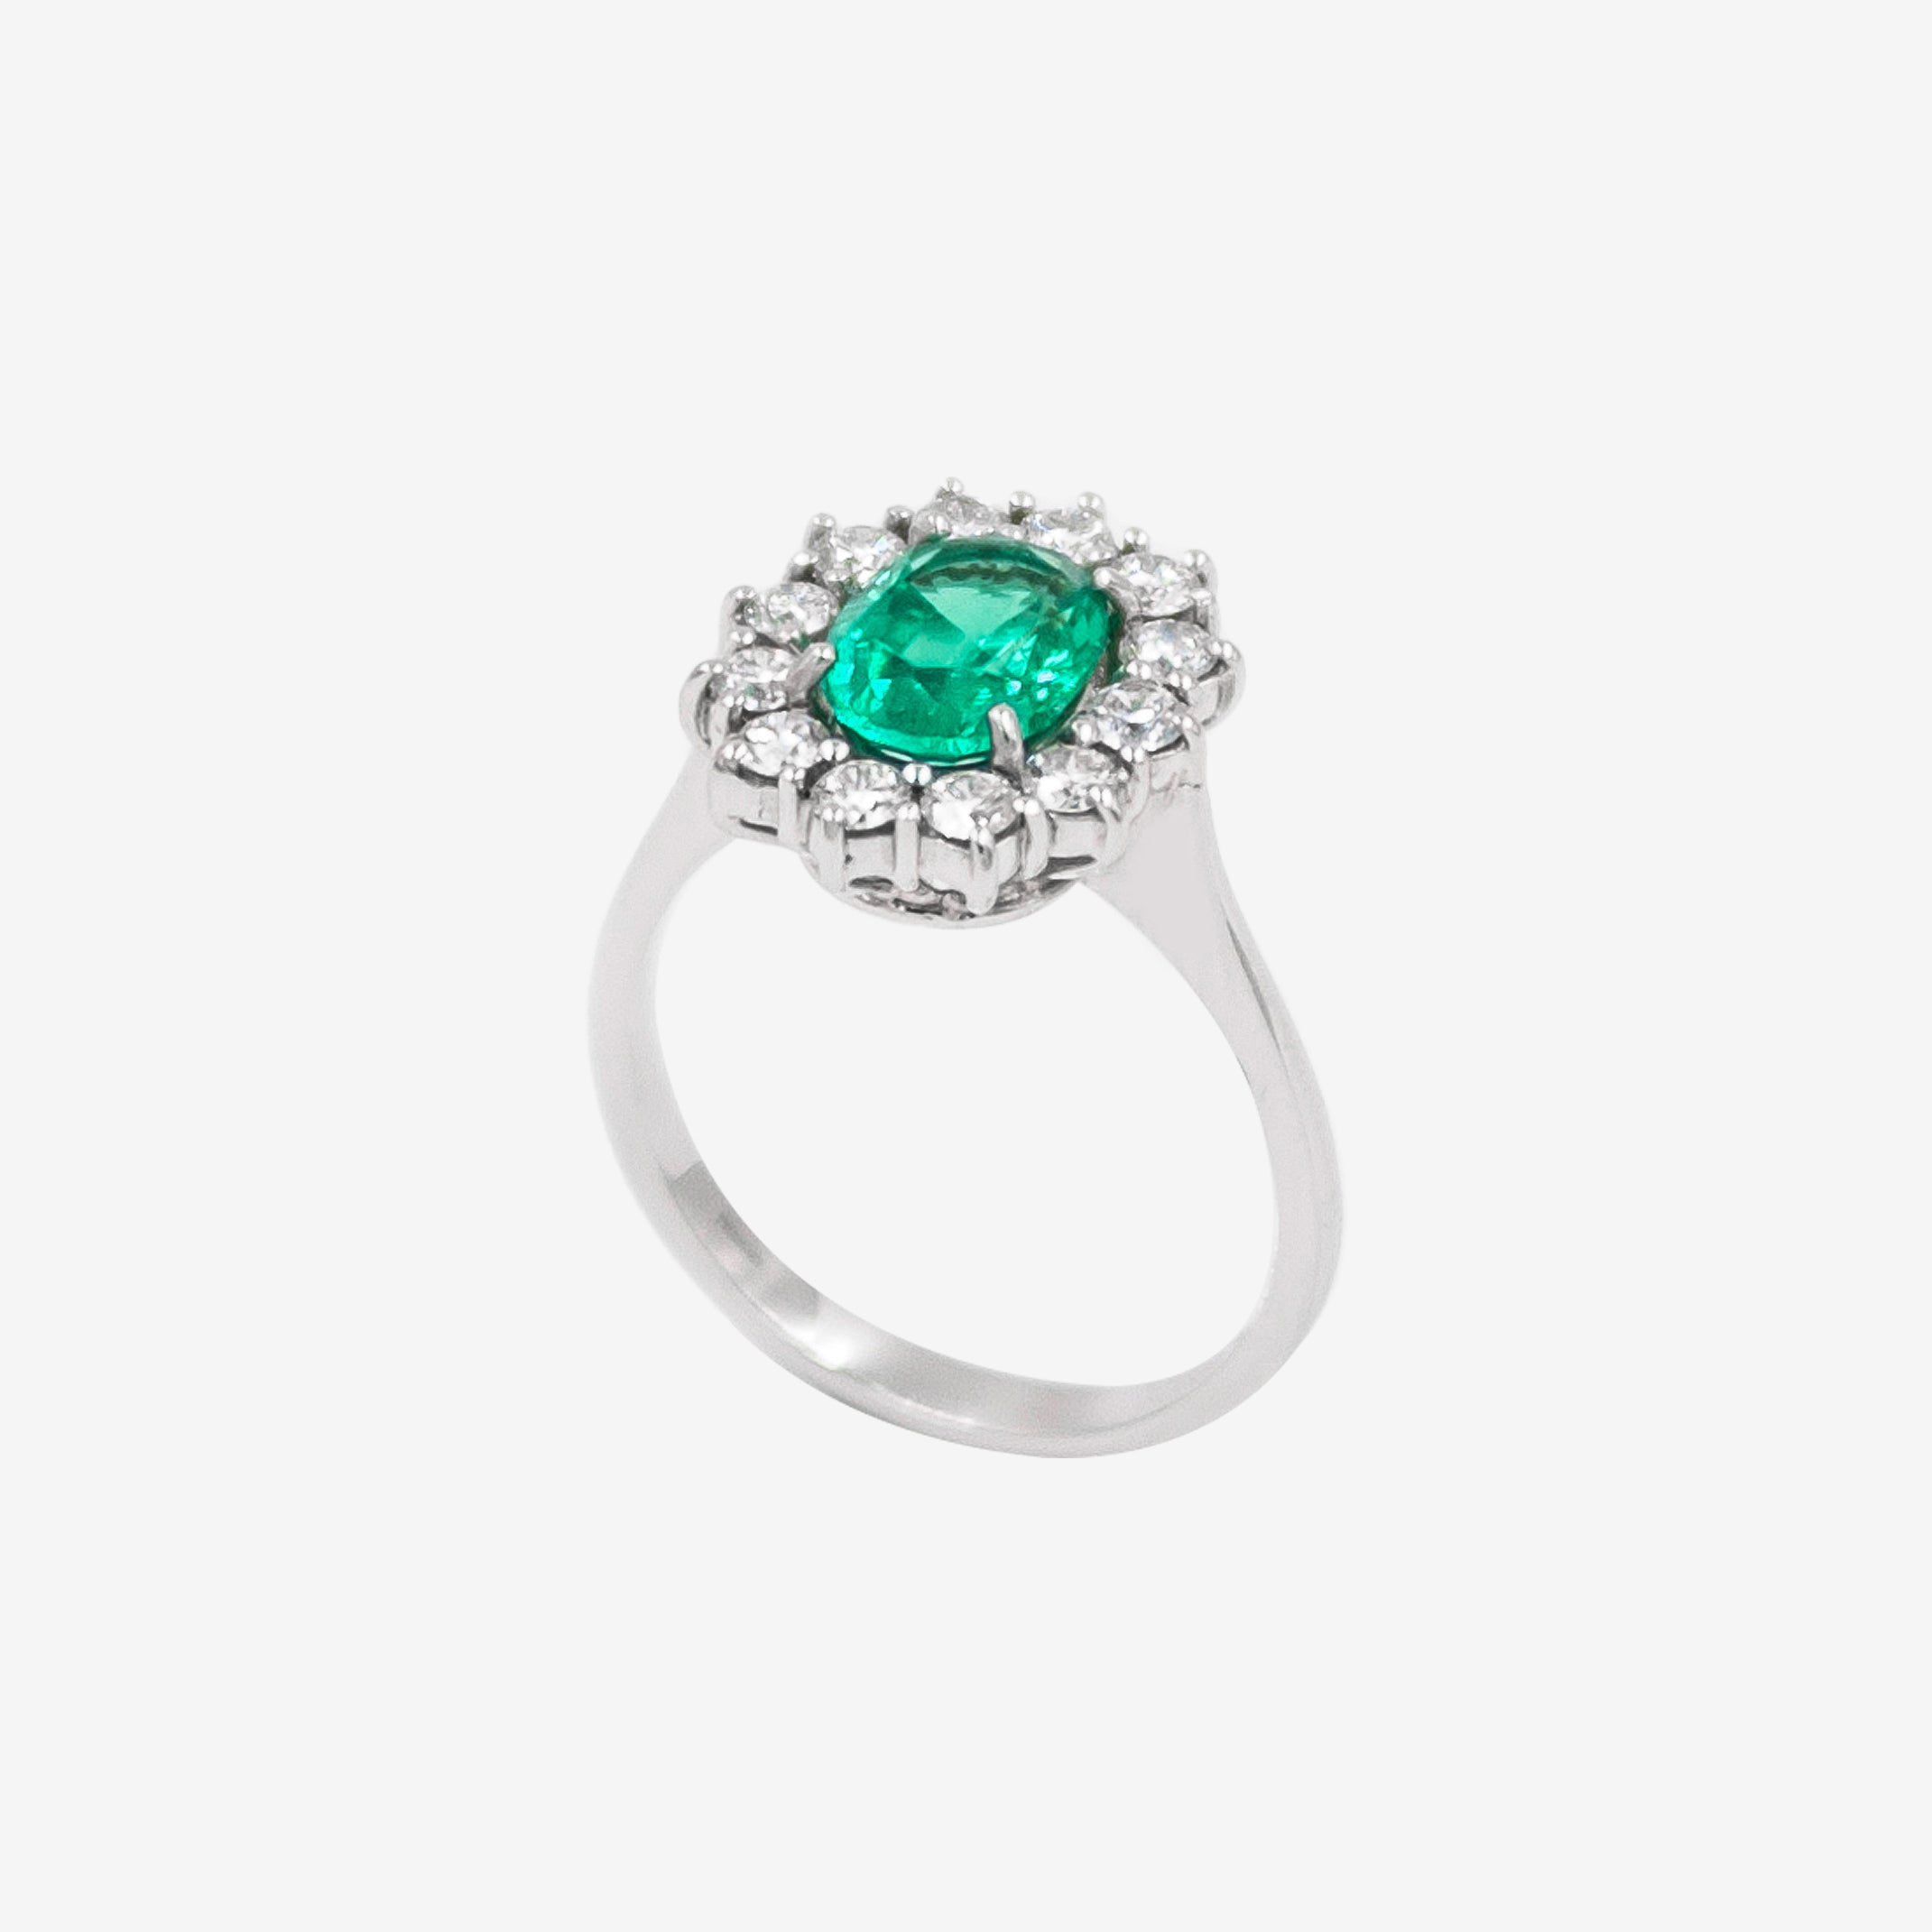 Emerald Flower ring with diamonds and emerald